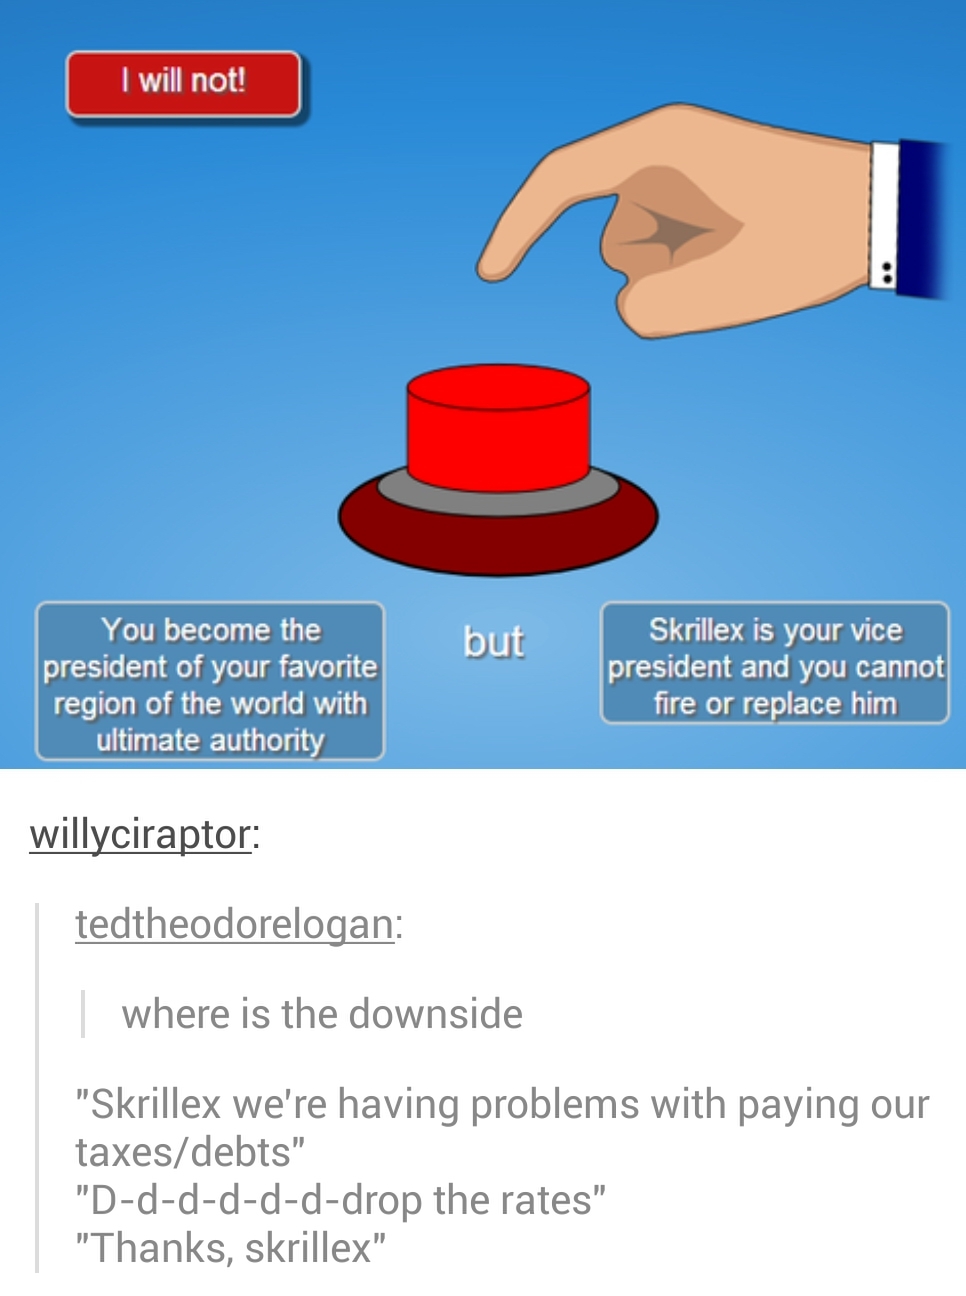 will you press the button - Meme by super0waffle :) Memedroid